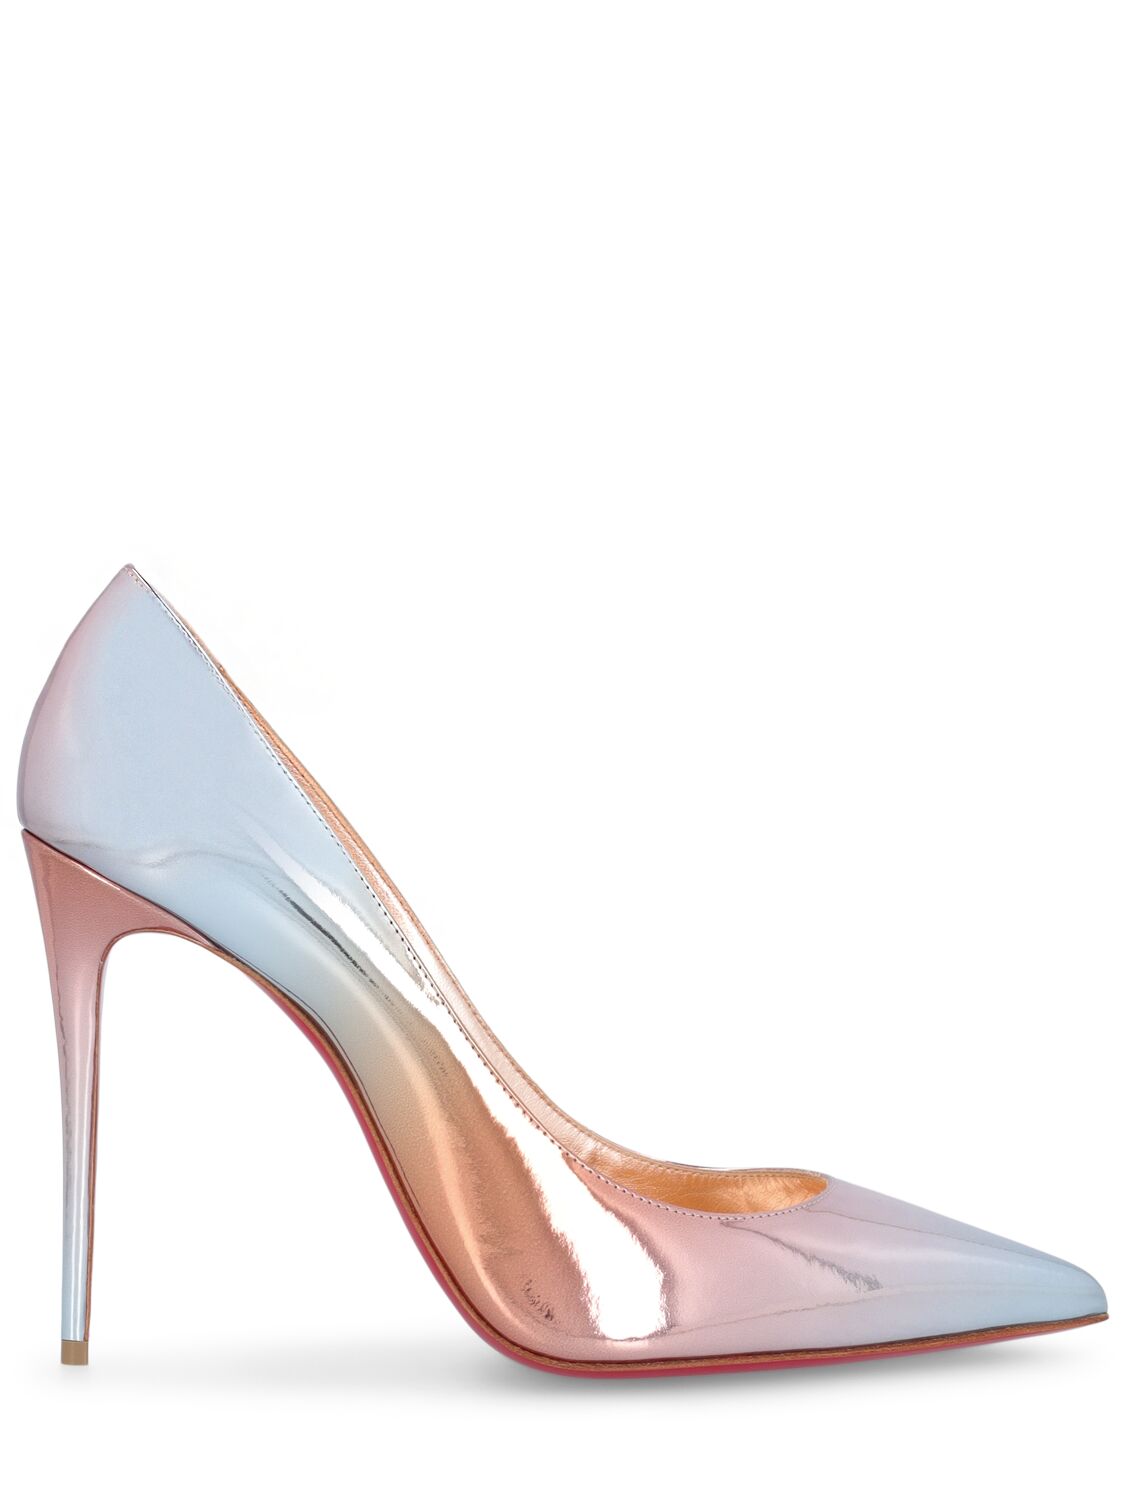 Christian Louboutin 100mm Kate Degradé Leather Pumps In Gray